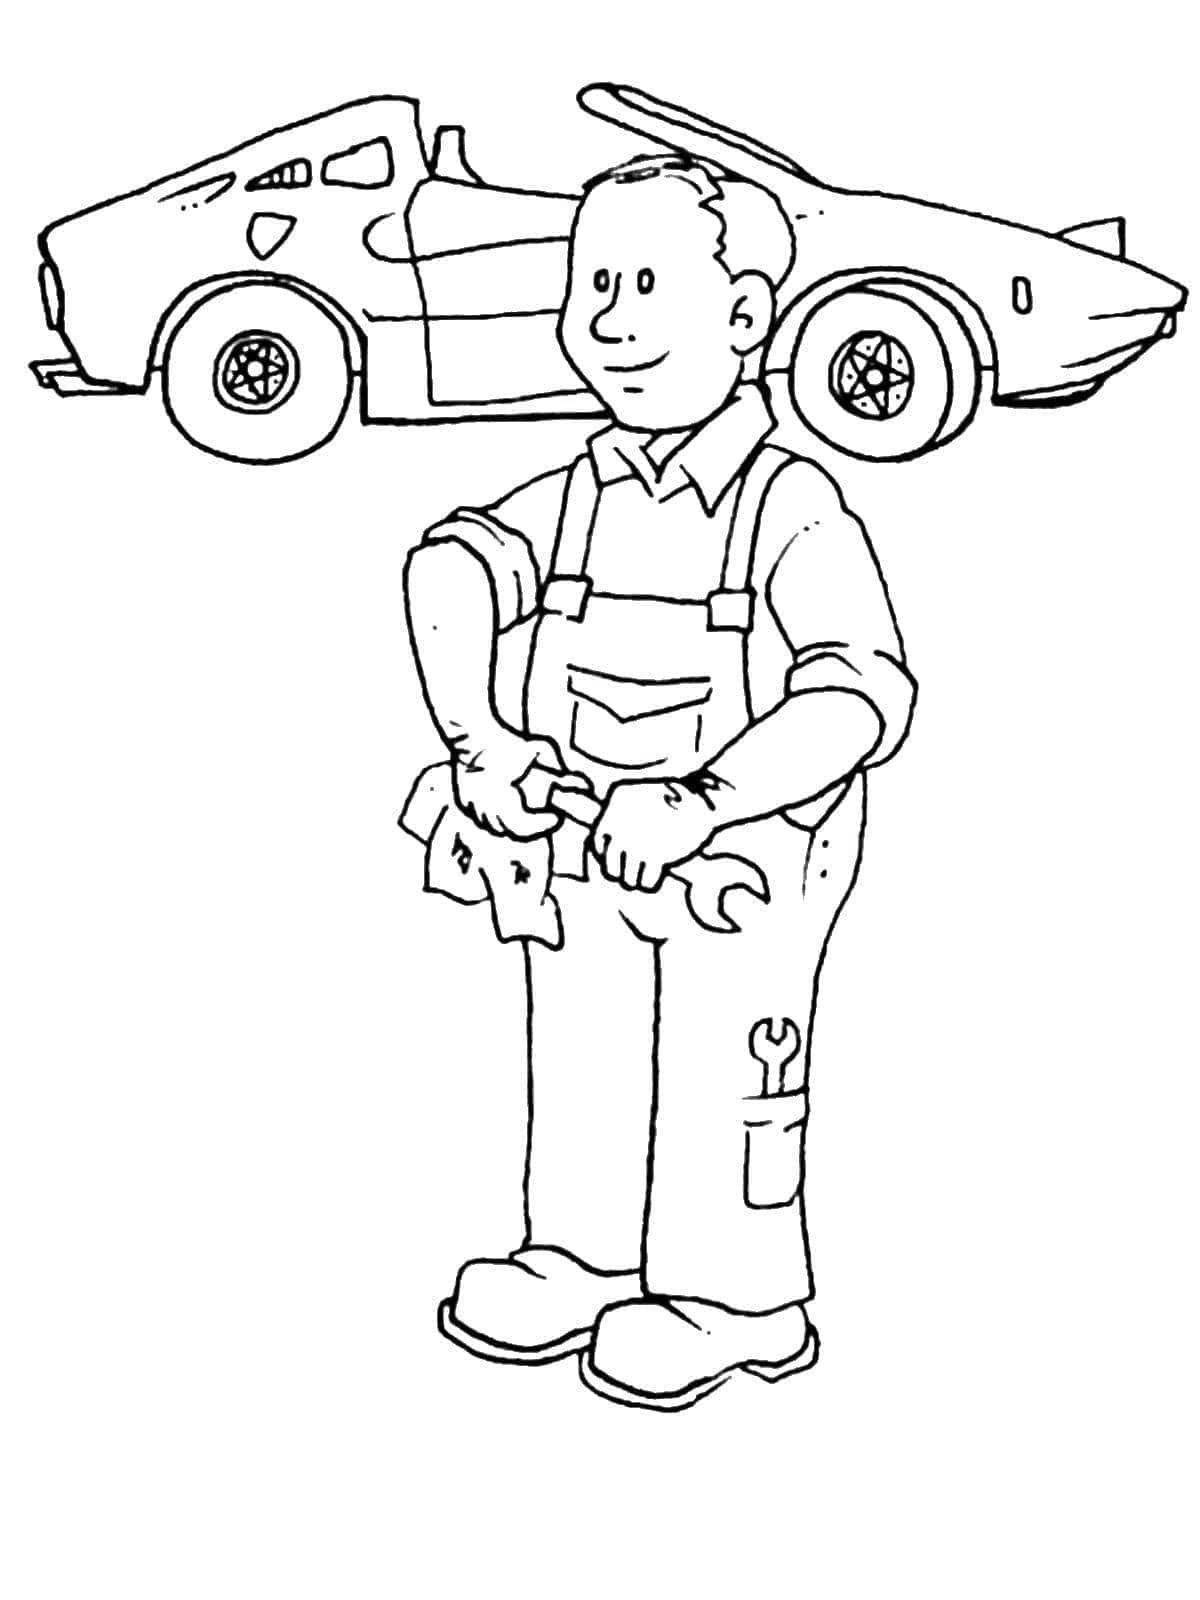 Color frenzy car service coloring page